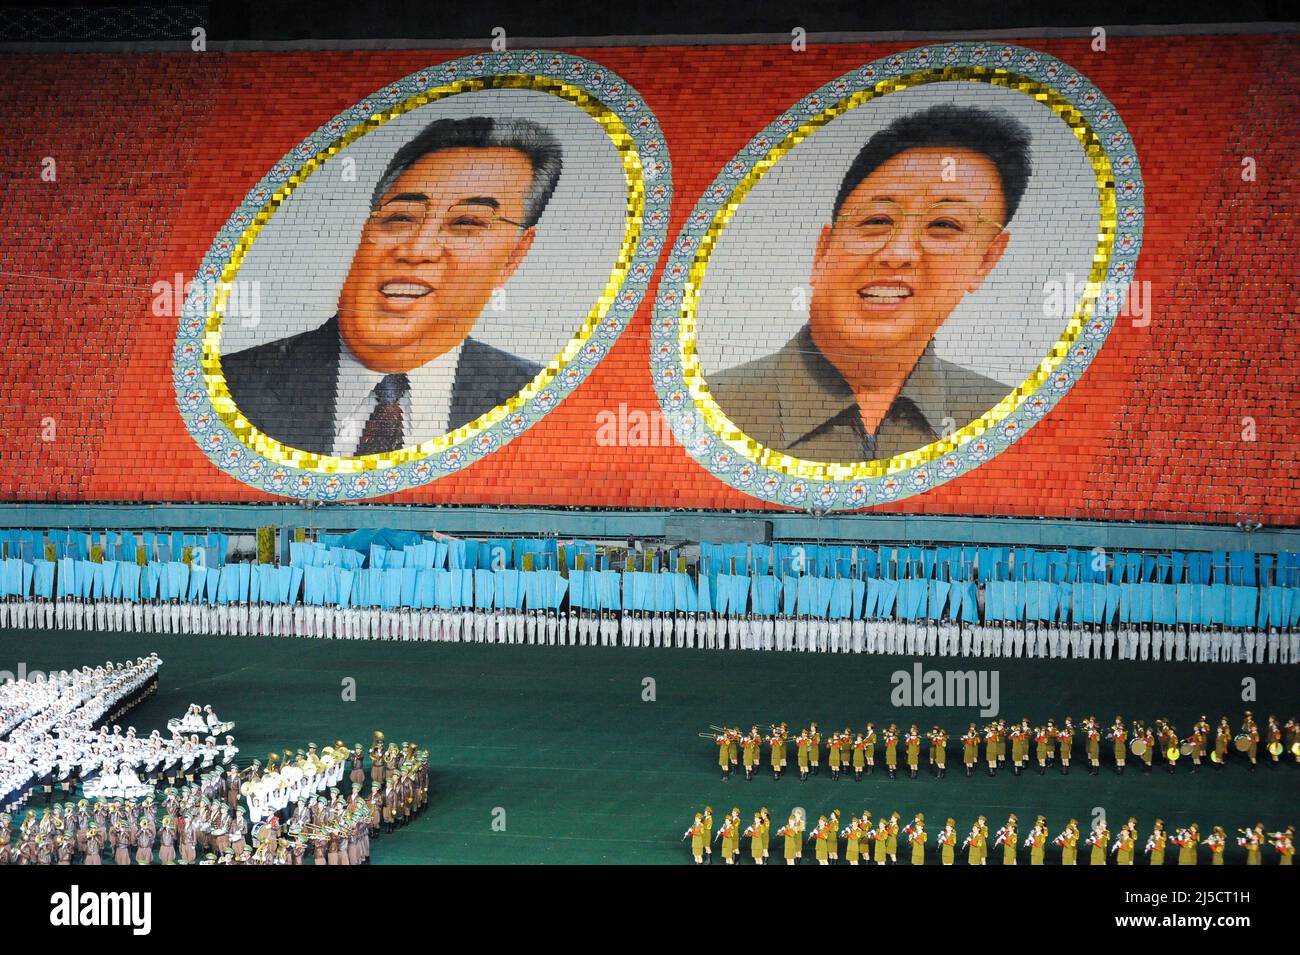 08.08.2012, Pjoengjang, North Korea, Asia - A huge mosaic of thousands of colorful posters shows the two portraits of former leaders Kim Il-sung and Kim Jong-il during the Arirang Festival and Mass Games with artistic performances, acrobats and dancers at the May First Stadium in the North Korean capital. [automated translation] Stock Photo